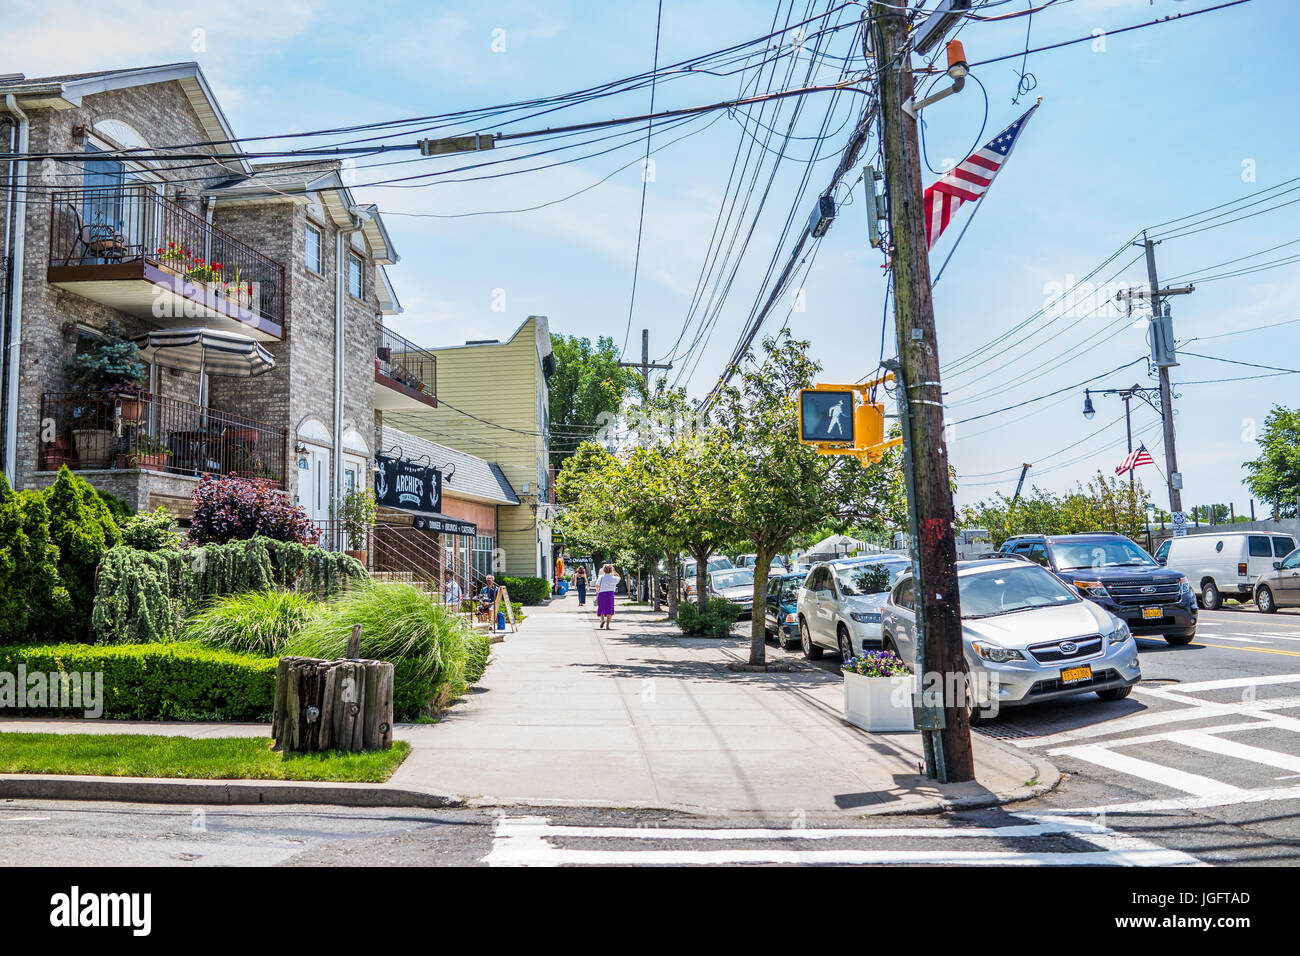 Bronx, USA - June 11, 2017: City Island road with sidewalk and restaurants with American flags Stock Photo